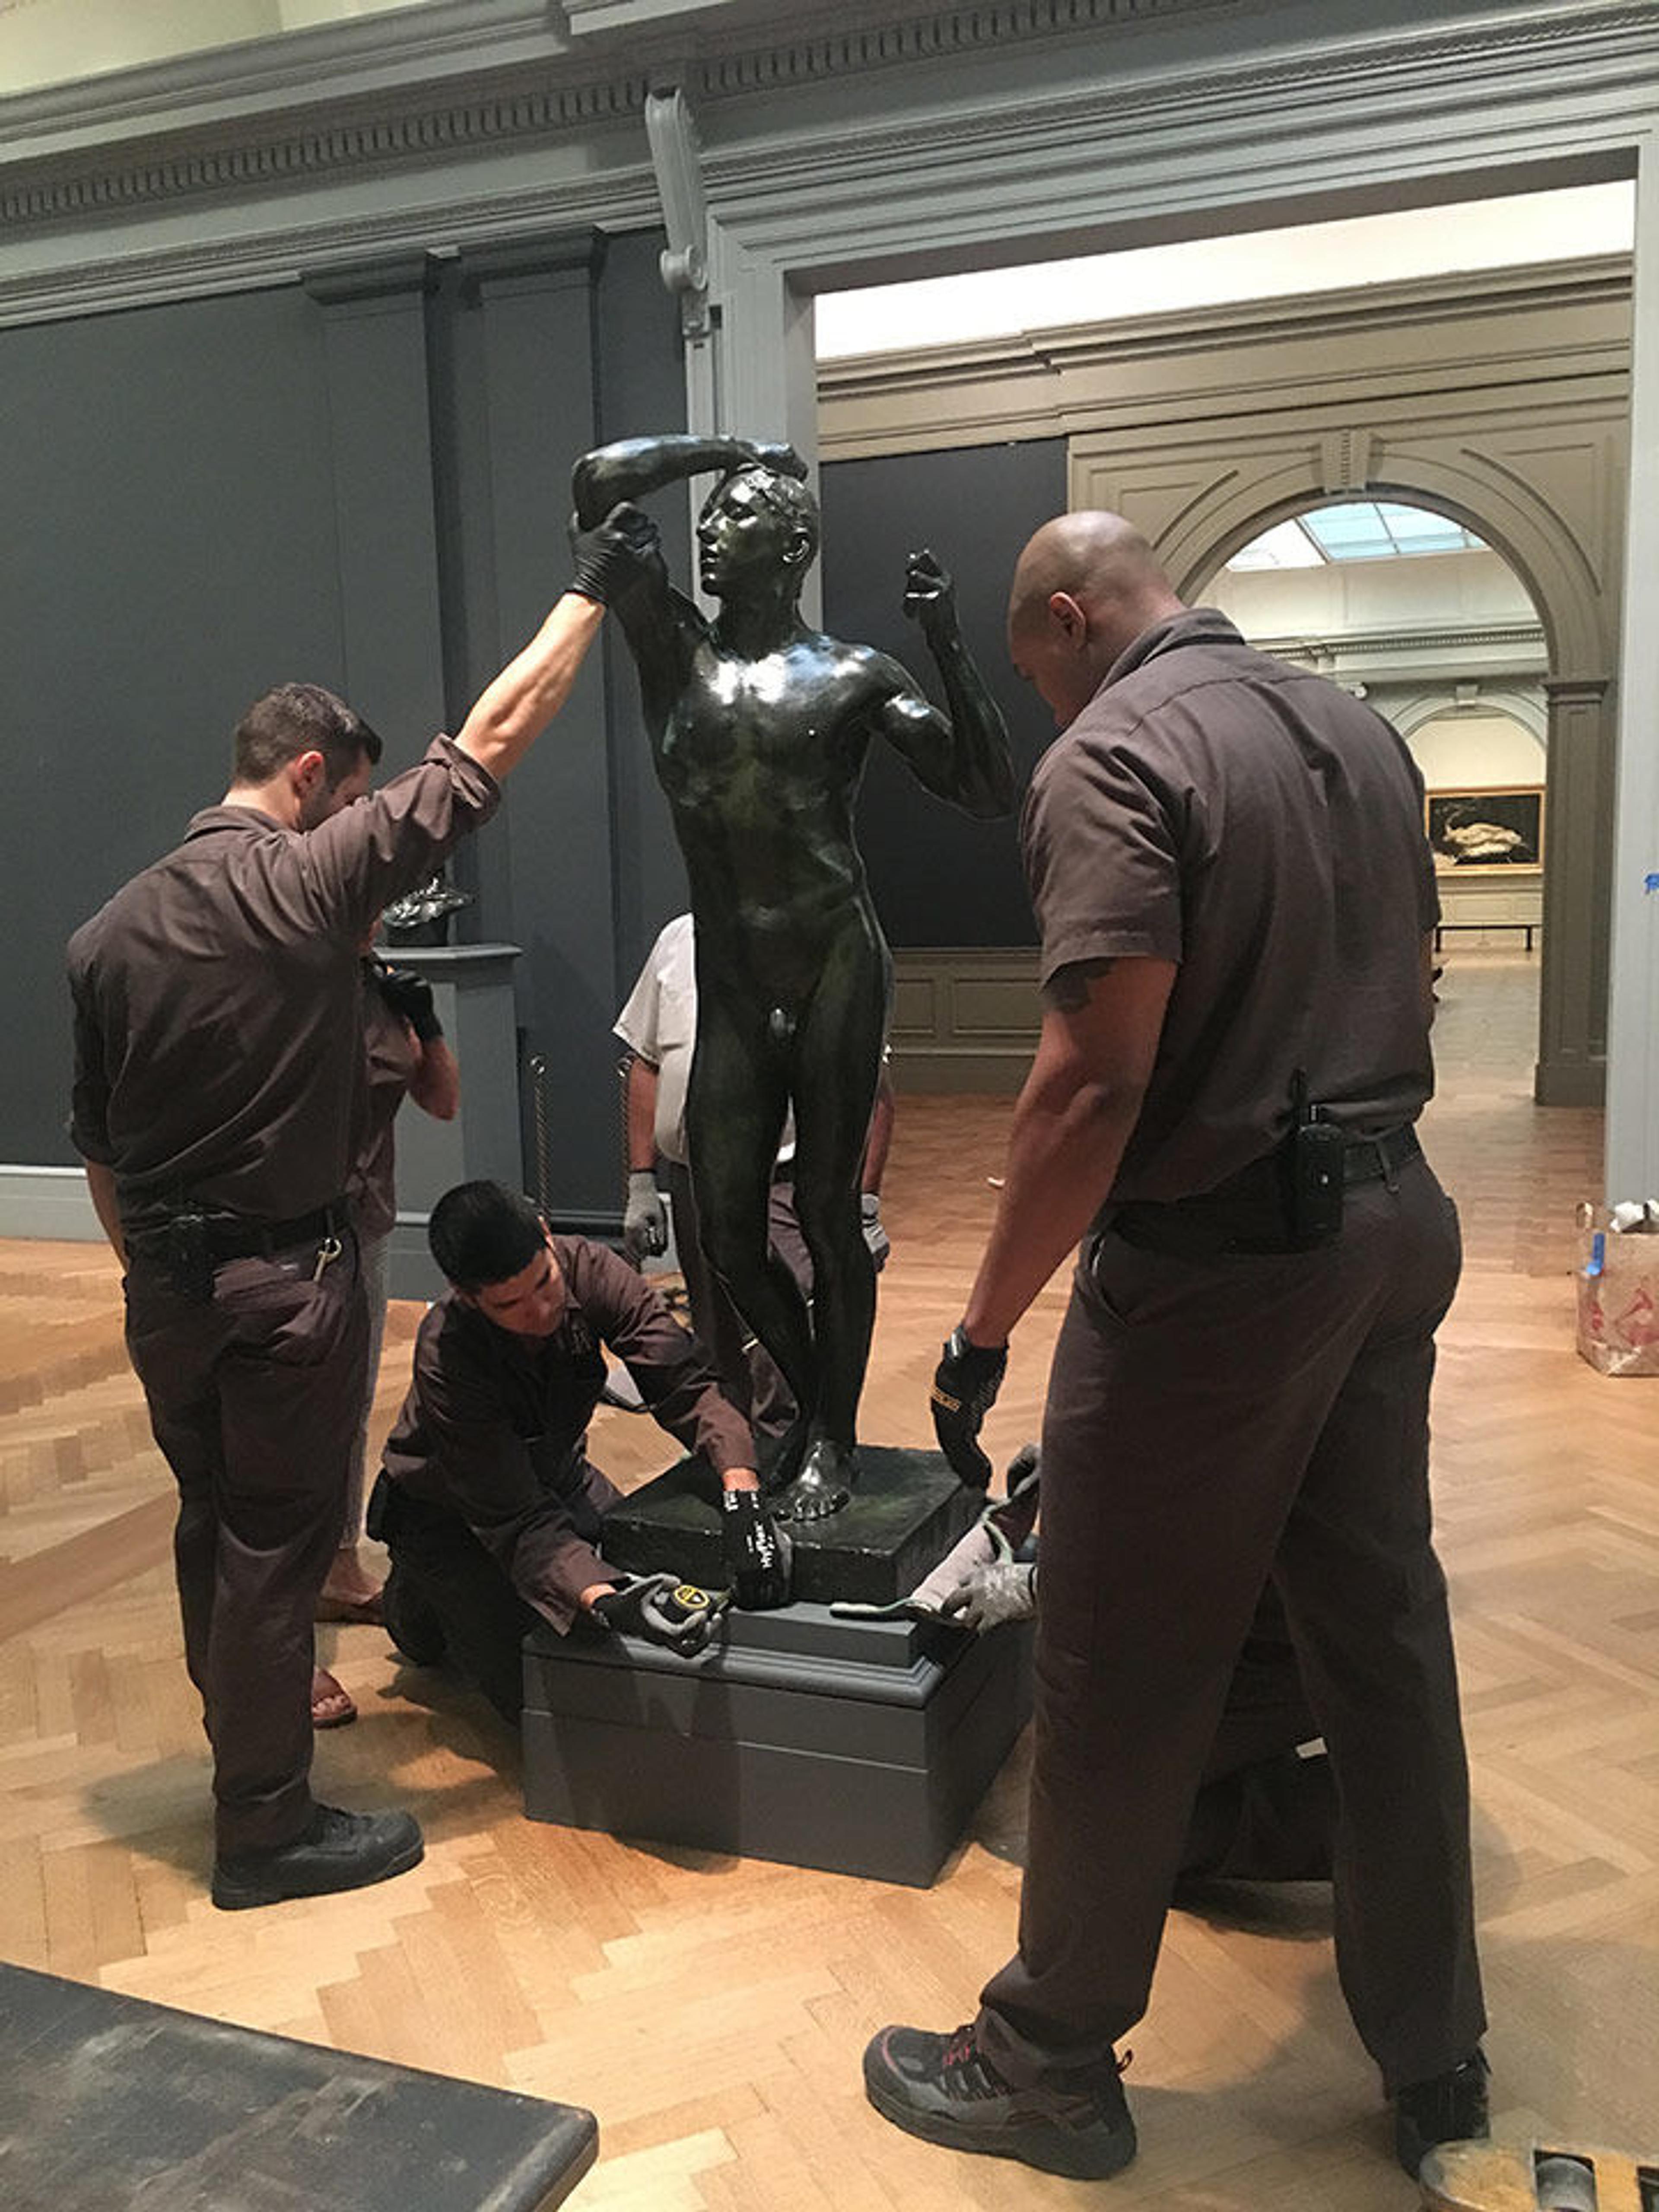 Museum rigger Luis Nuñez takes measurements to center The Age of Bronze on its base. Michael Doscher and Derrick Williams stand to his left and right.